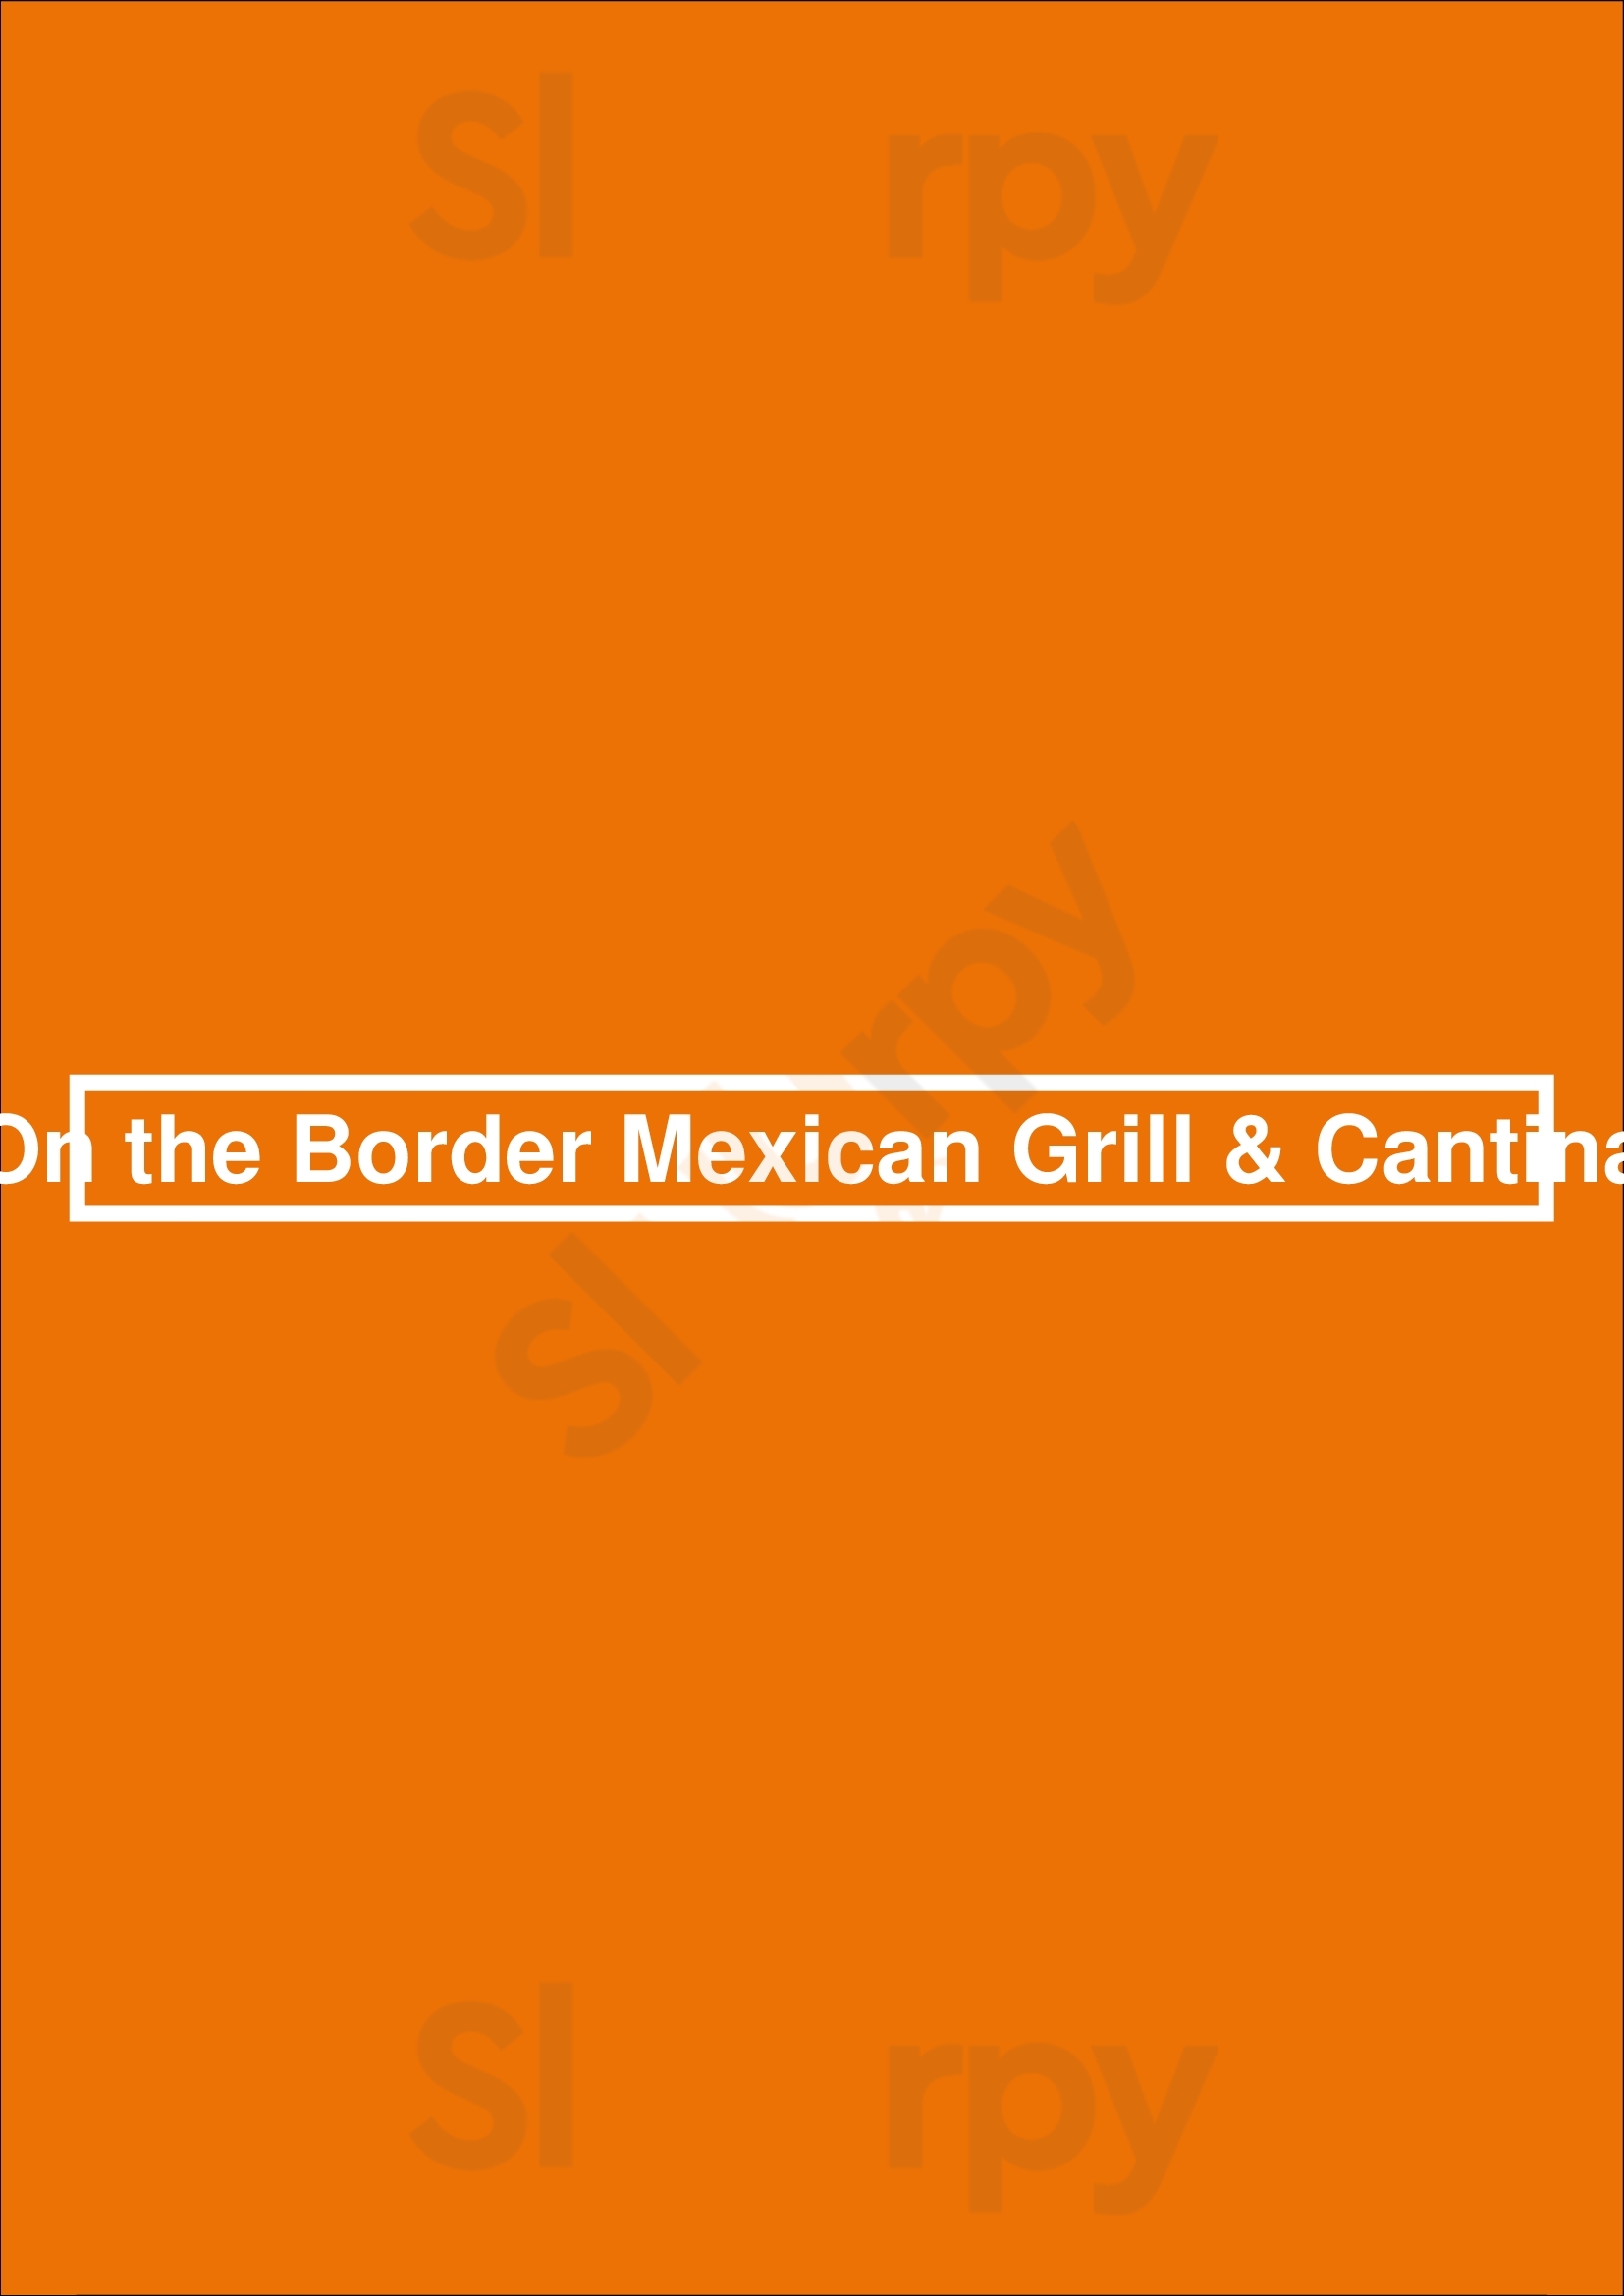 On The Border Mexican Grill & Cantina West Springfield Menu - 1